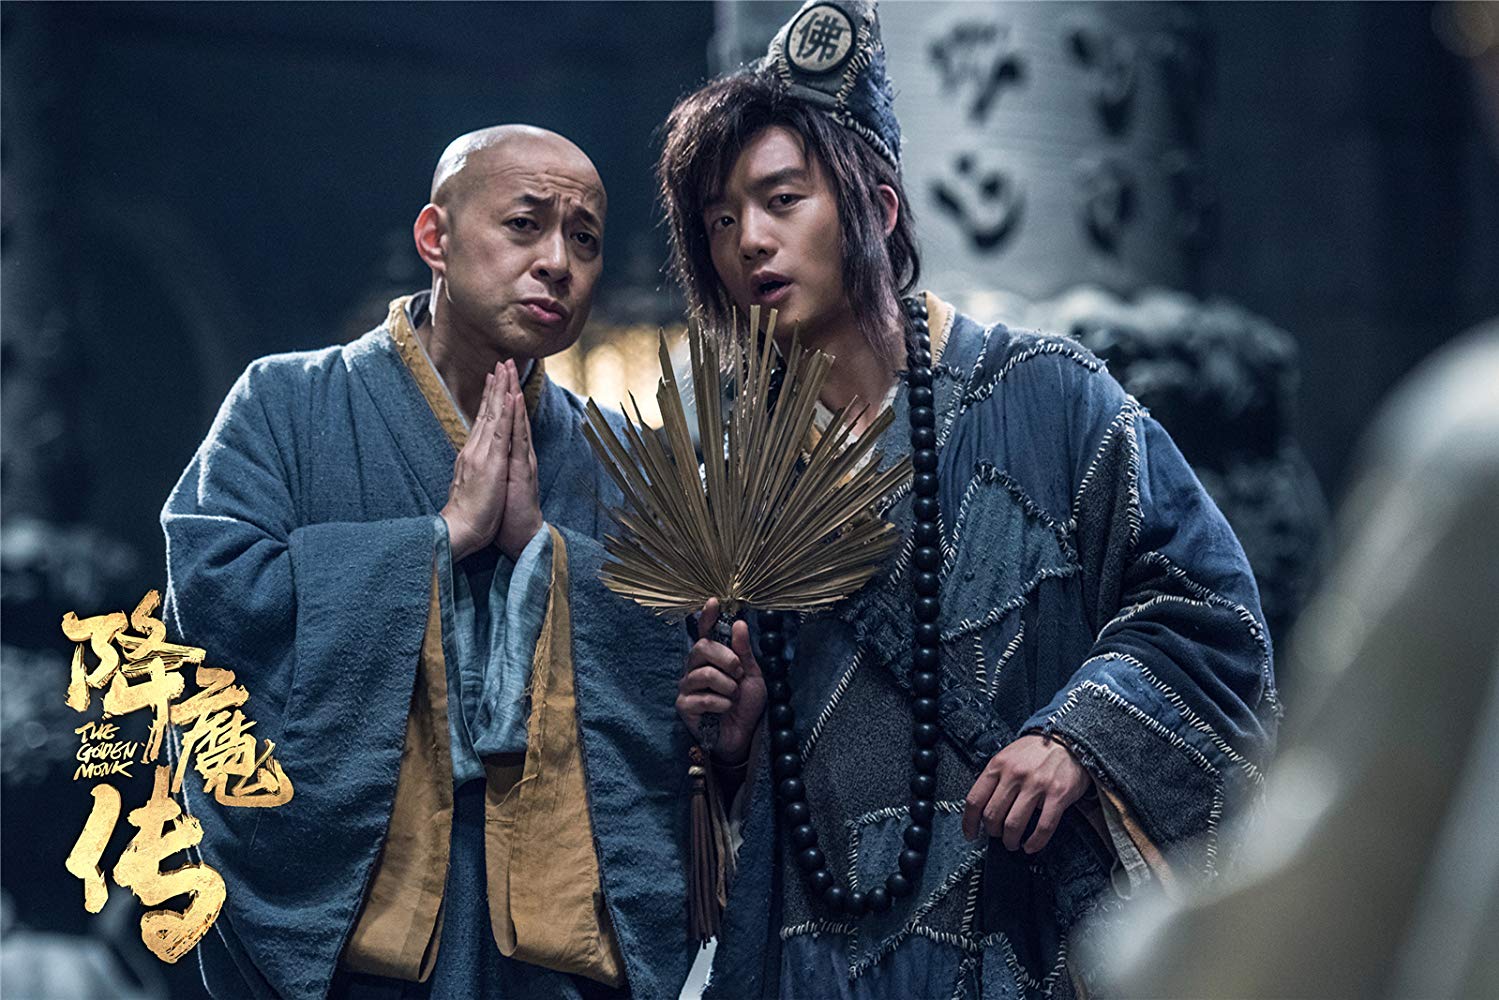 The Golden Monk [Sub: Eng] 2017 Full Movie Watch in HD 